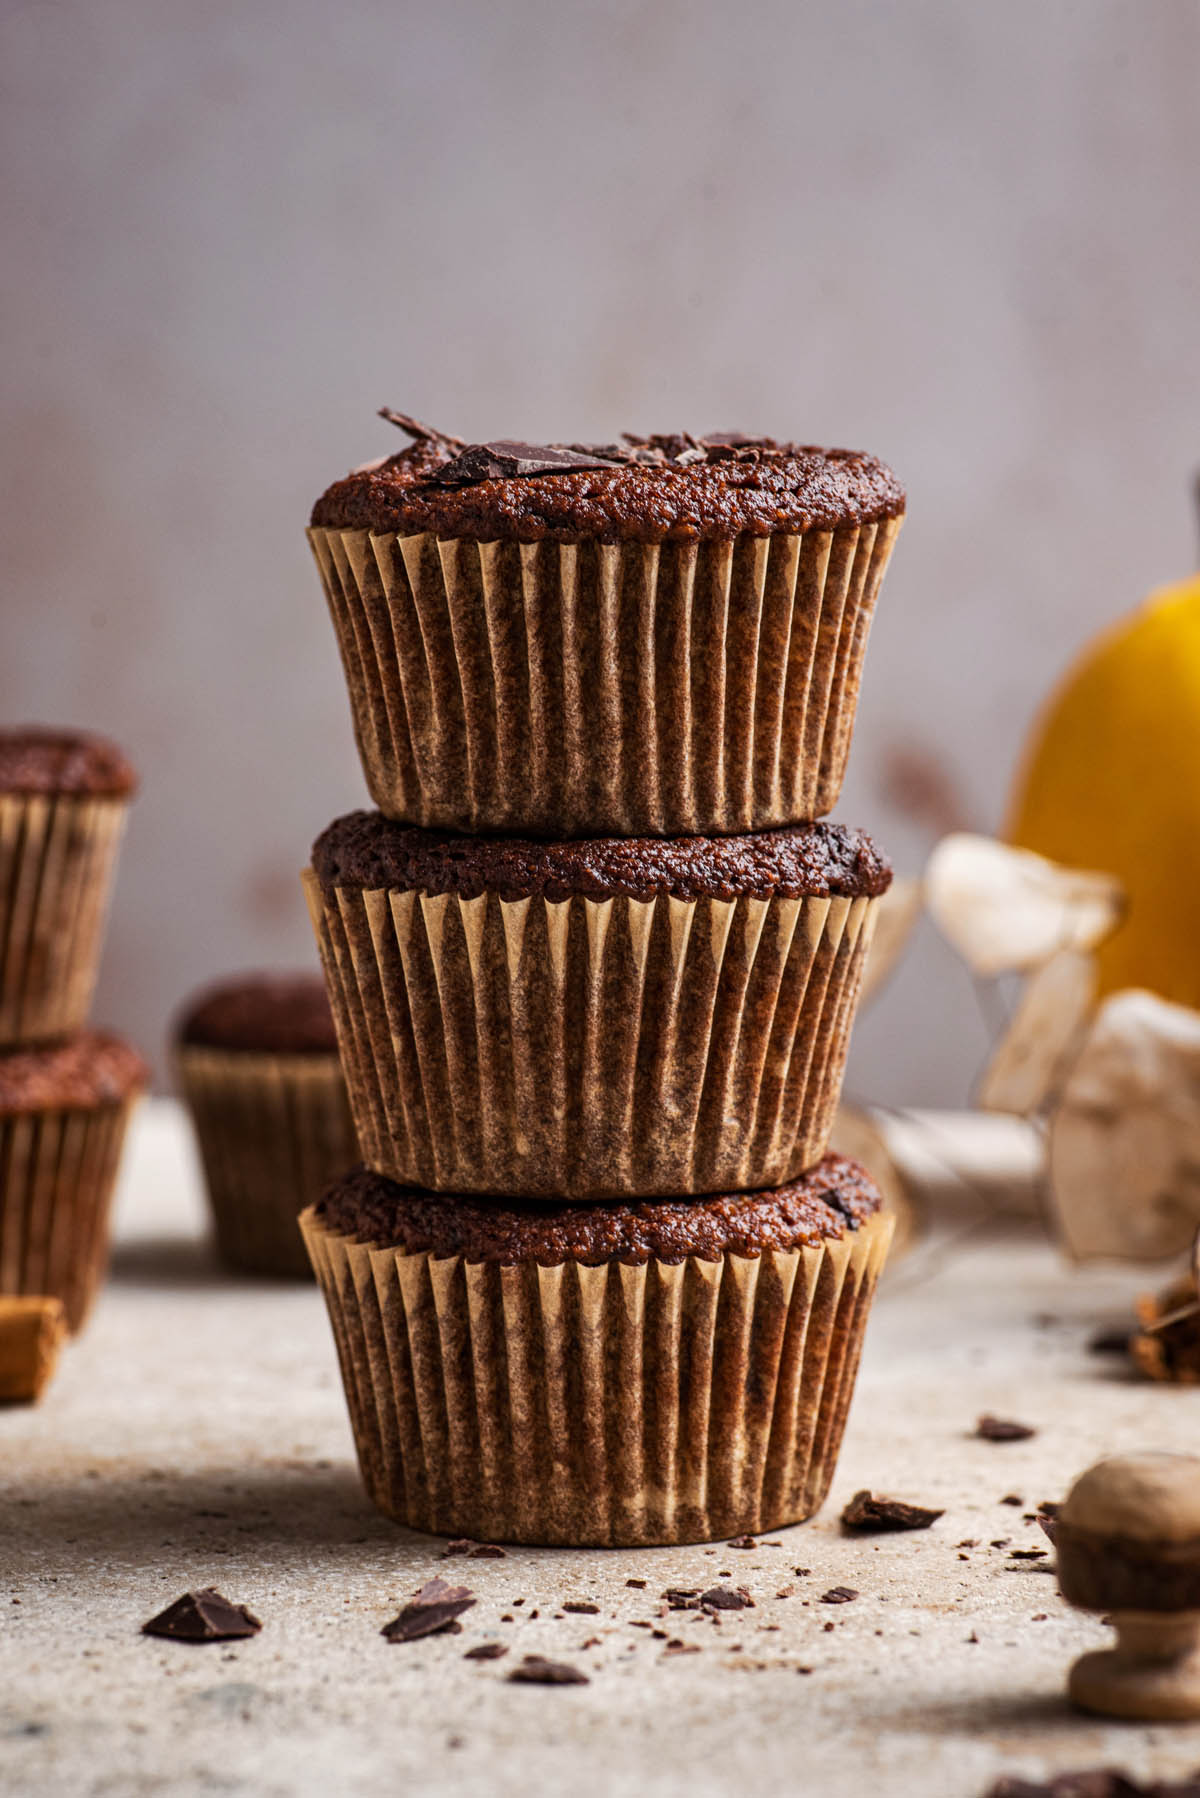 A stack of three muffins, close up.